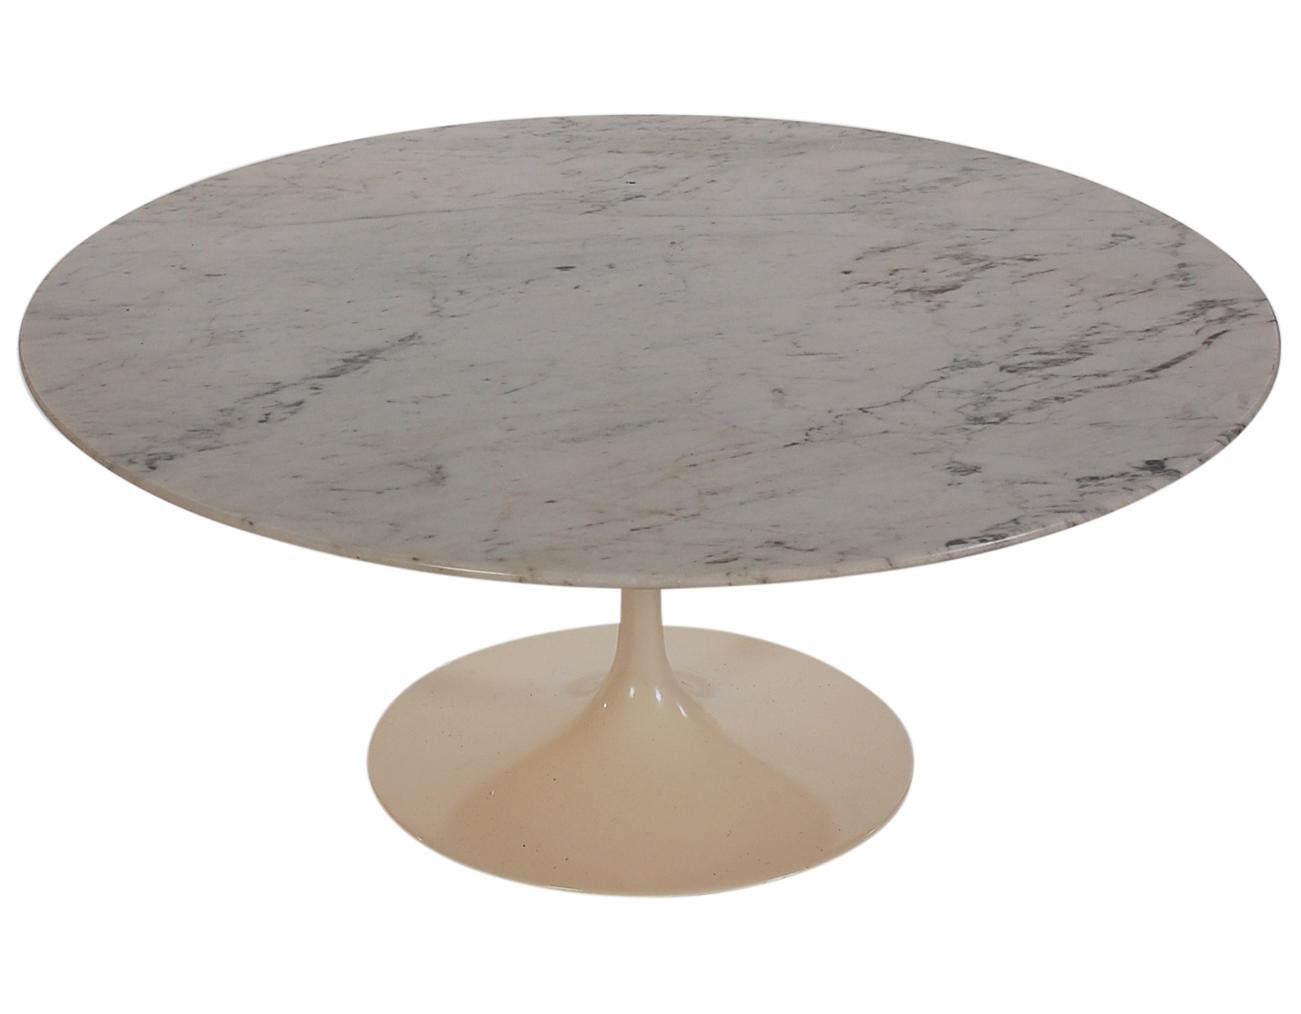 An early example of Eero Saarinen's Tulip table prosuced by Knoll in the early 1960s. This table features a cast iron weighted aluminum base with circular marble top. All original in great condition.